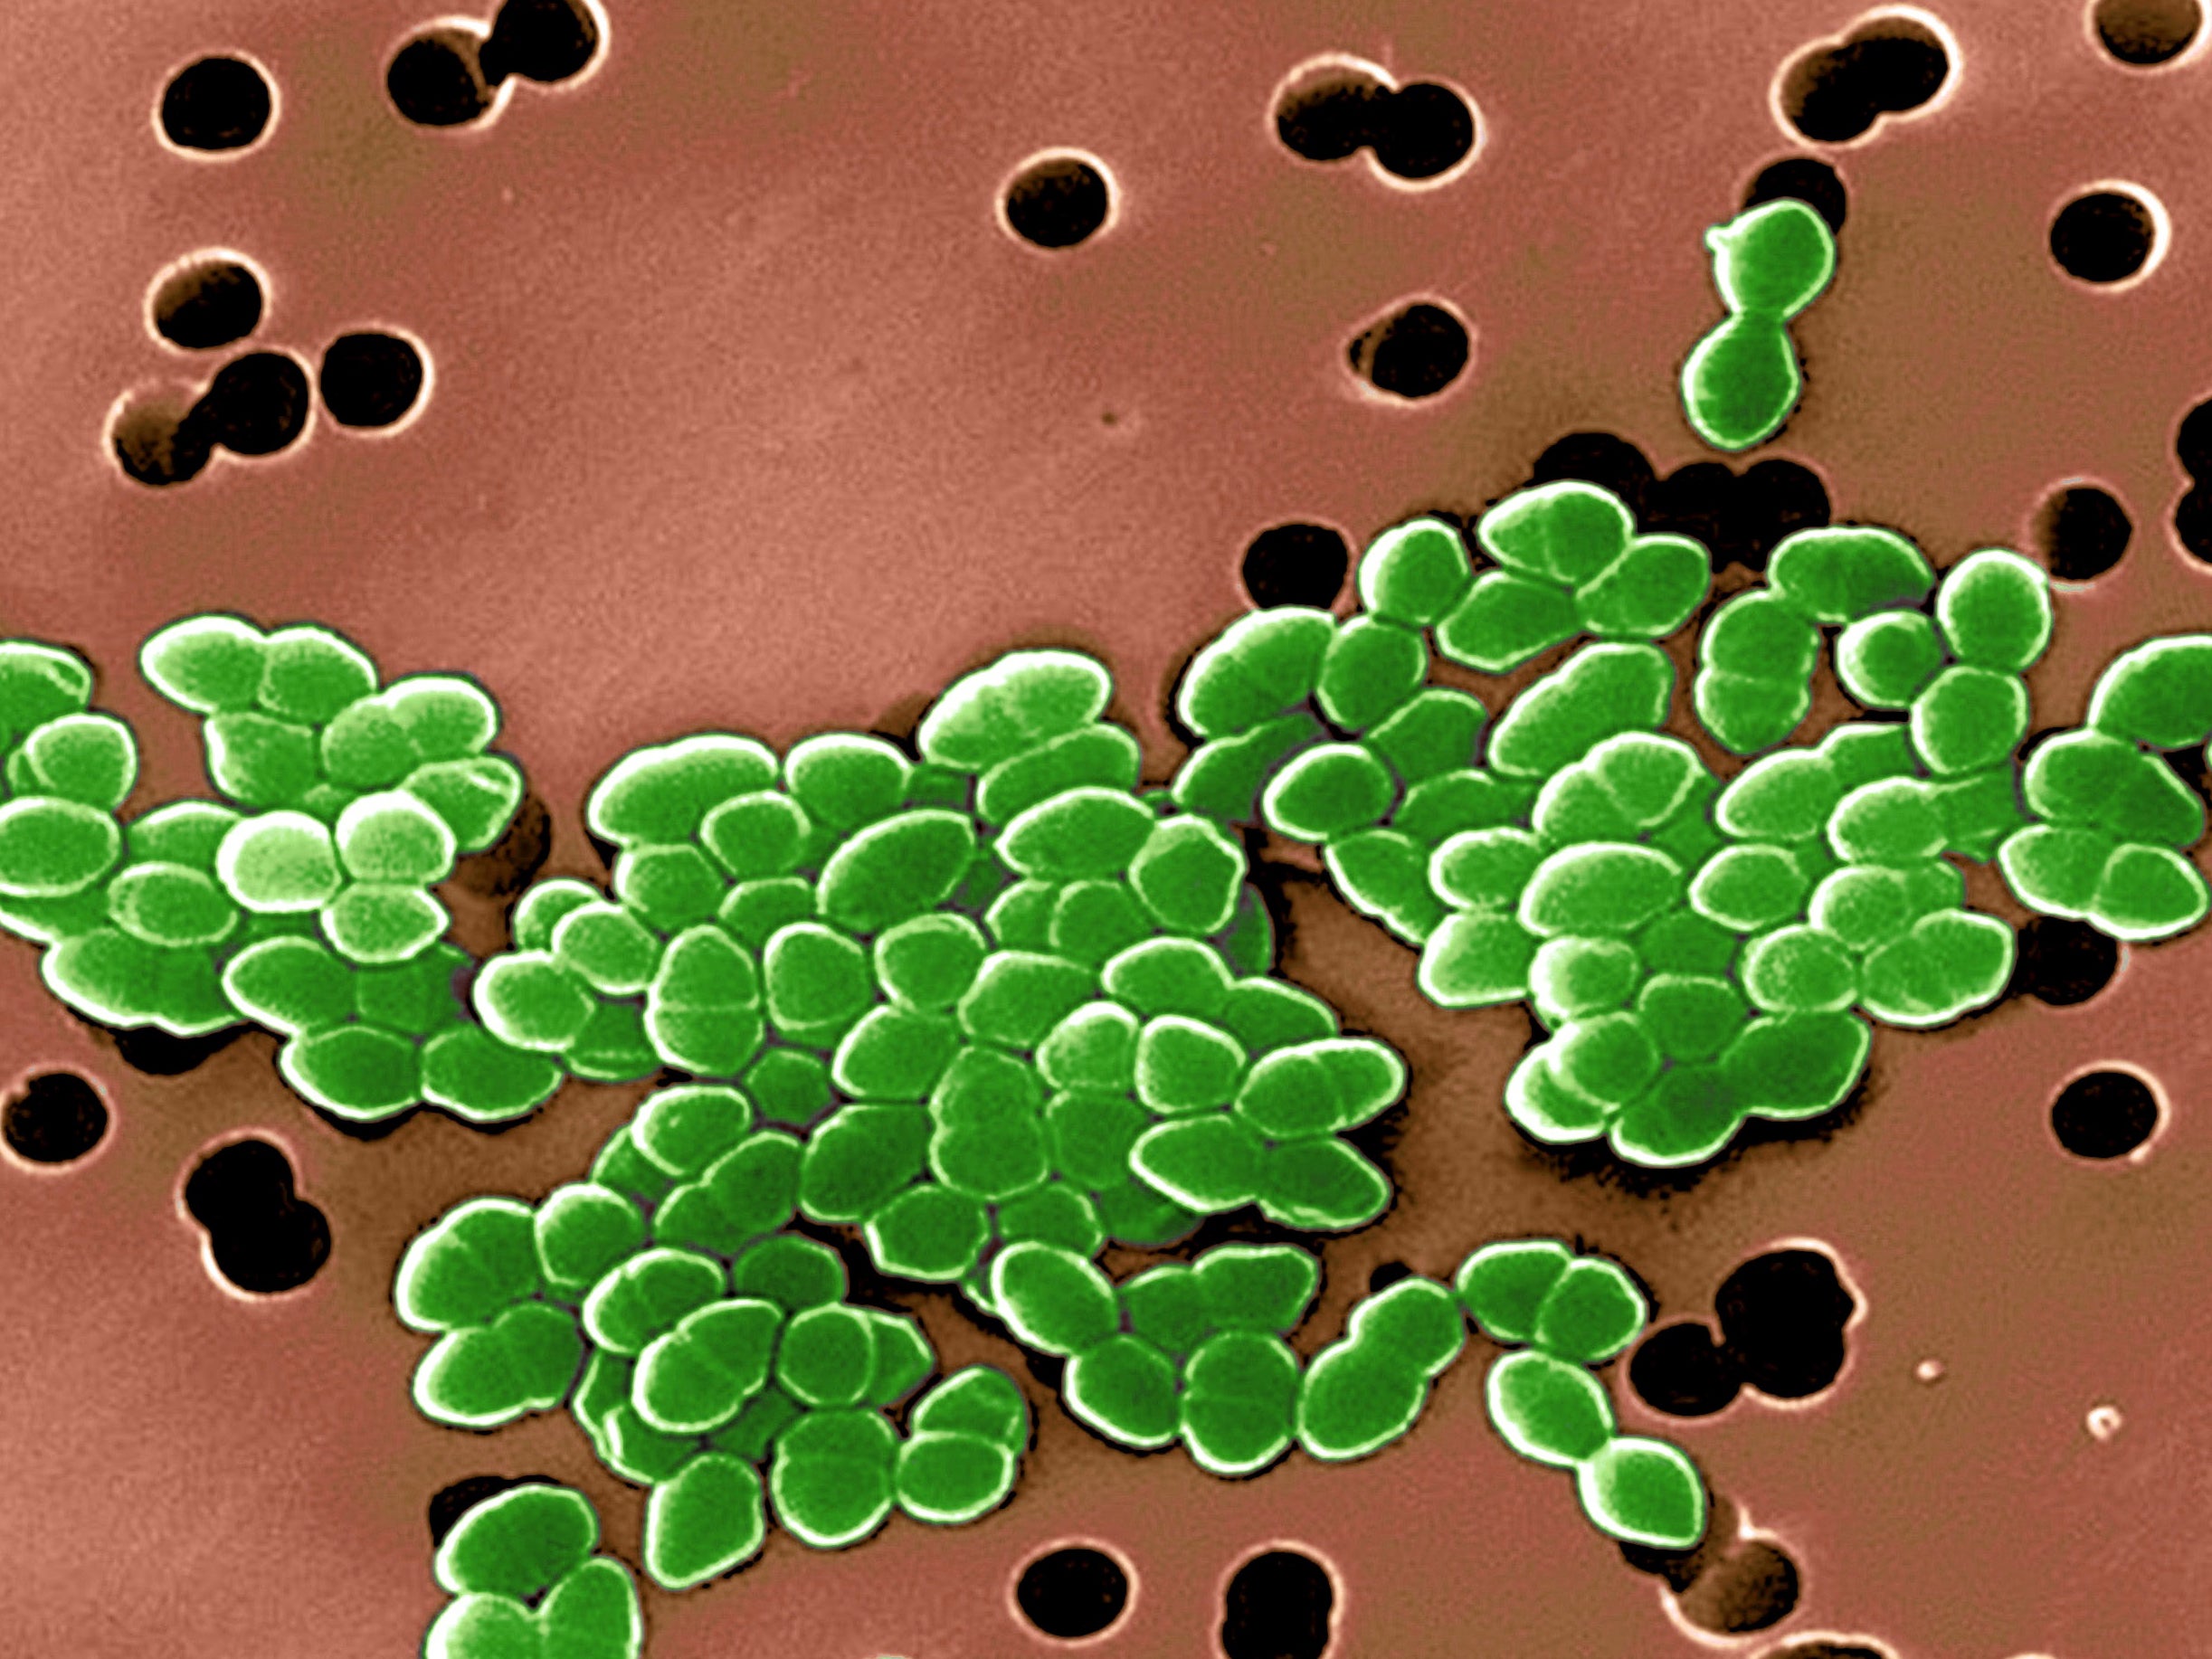 Vancomycin resistant bacteria are common forms of hospital infections